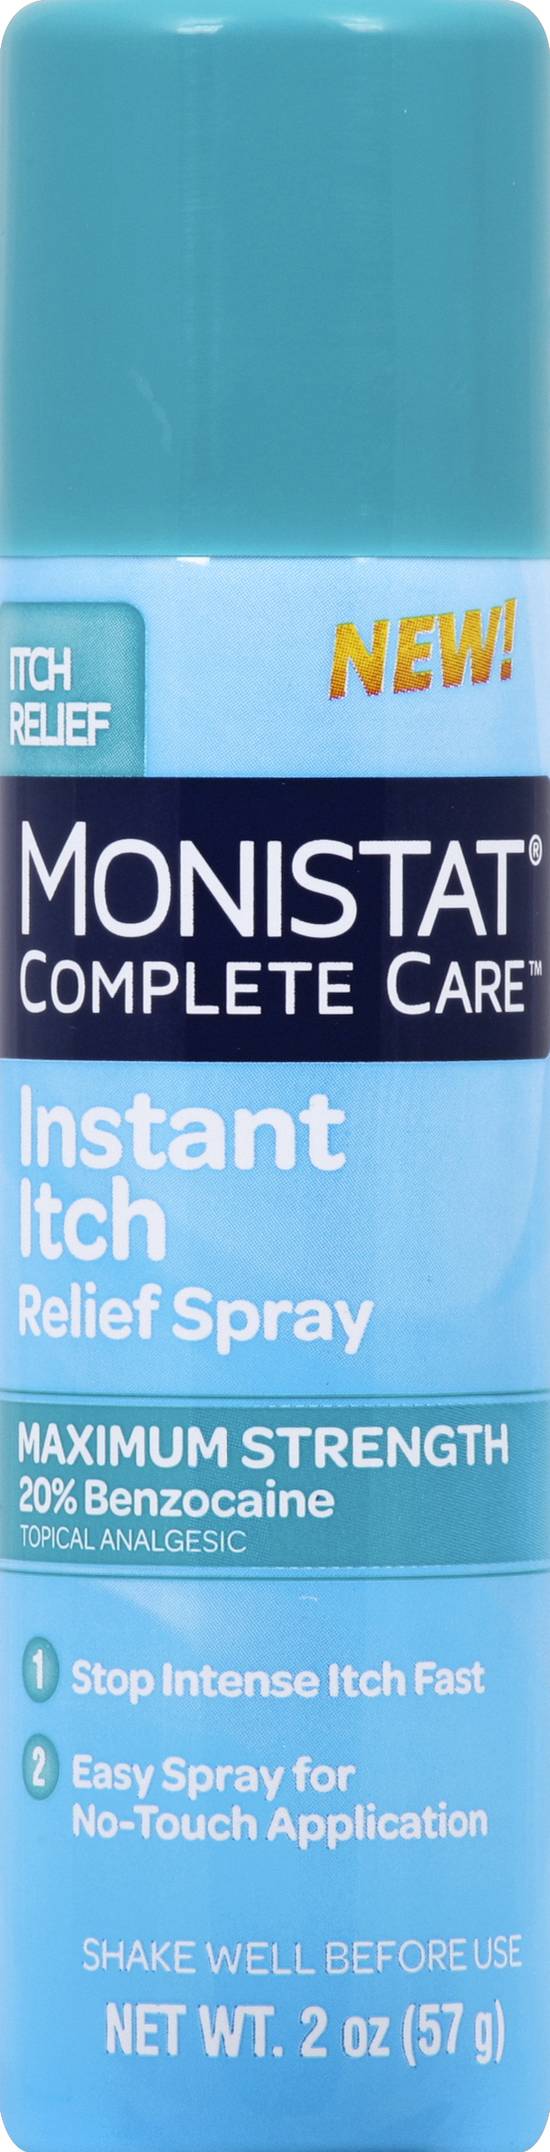 Monistat Care Instant Itch Relief Spray Cools & Soothes Maximum Strength